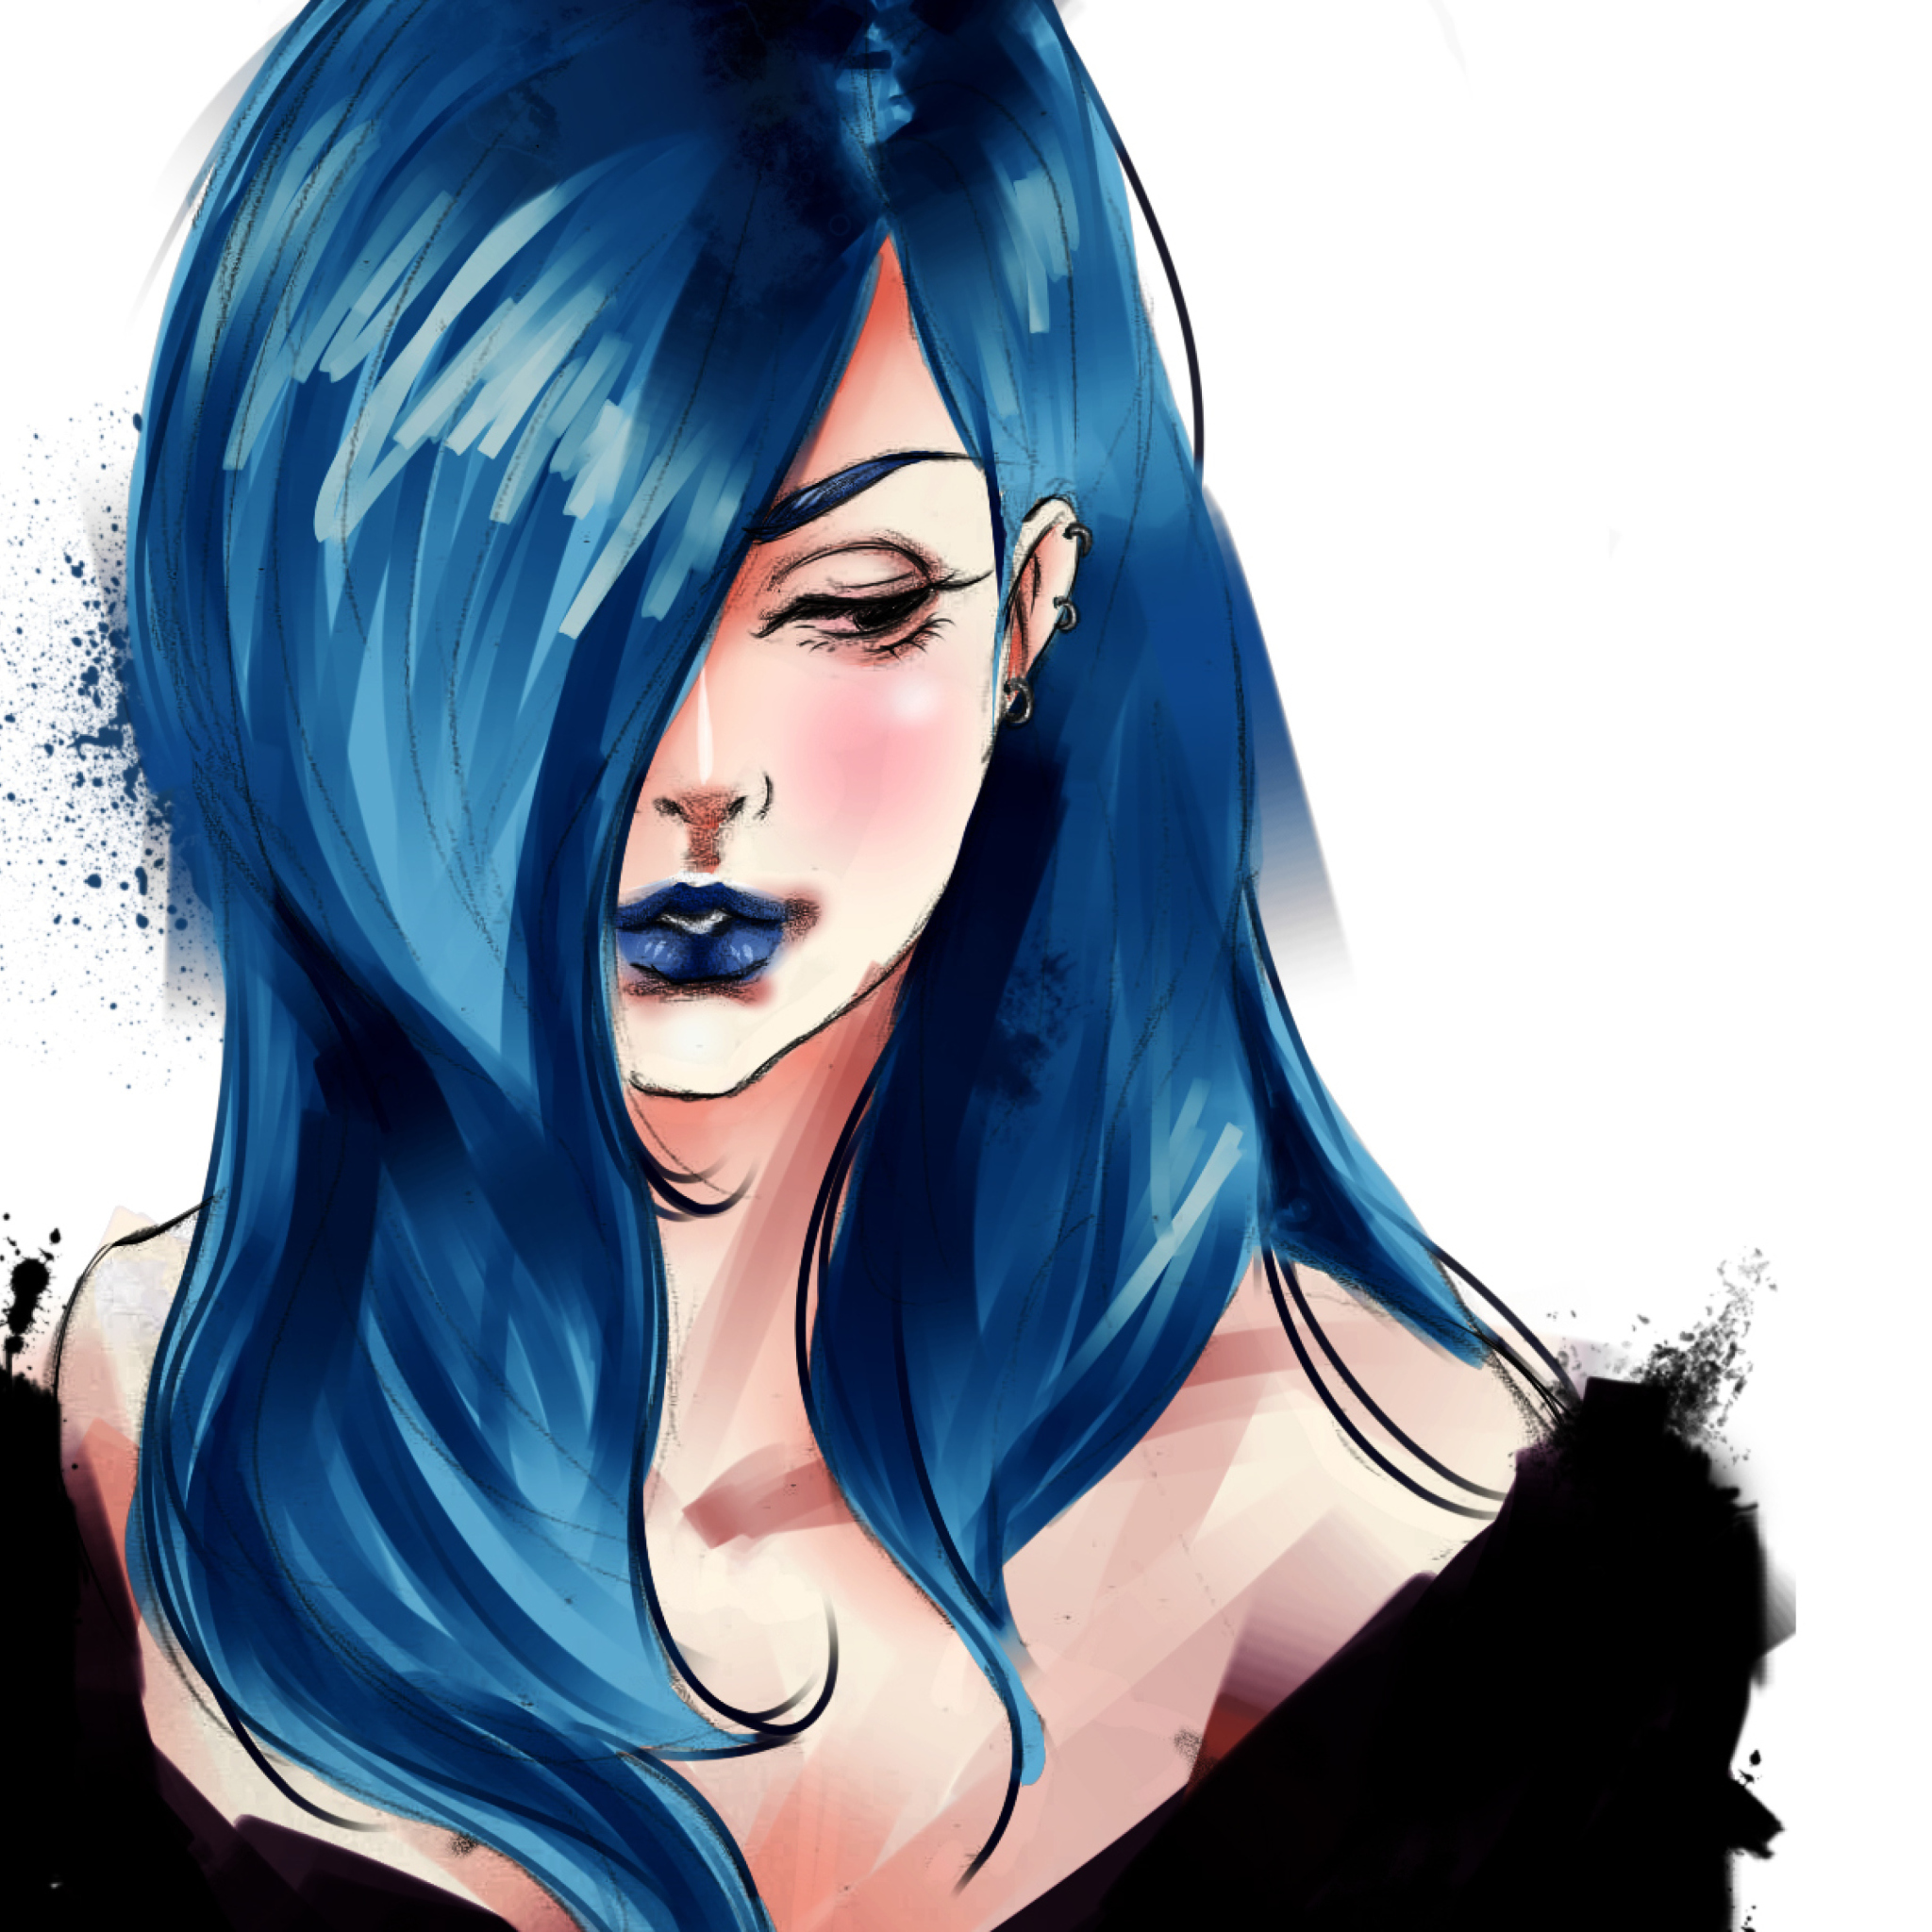 Girl With Blue Hair Painting wallpaper 2048x2048